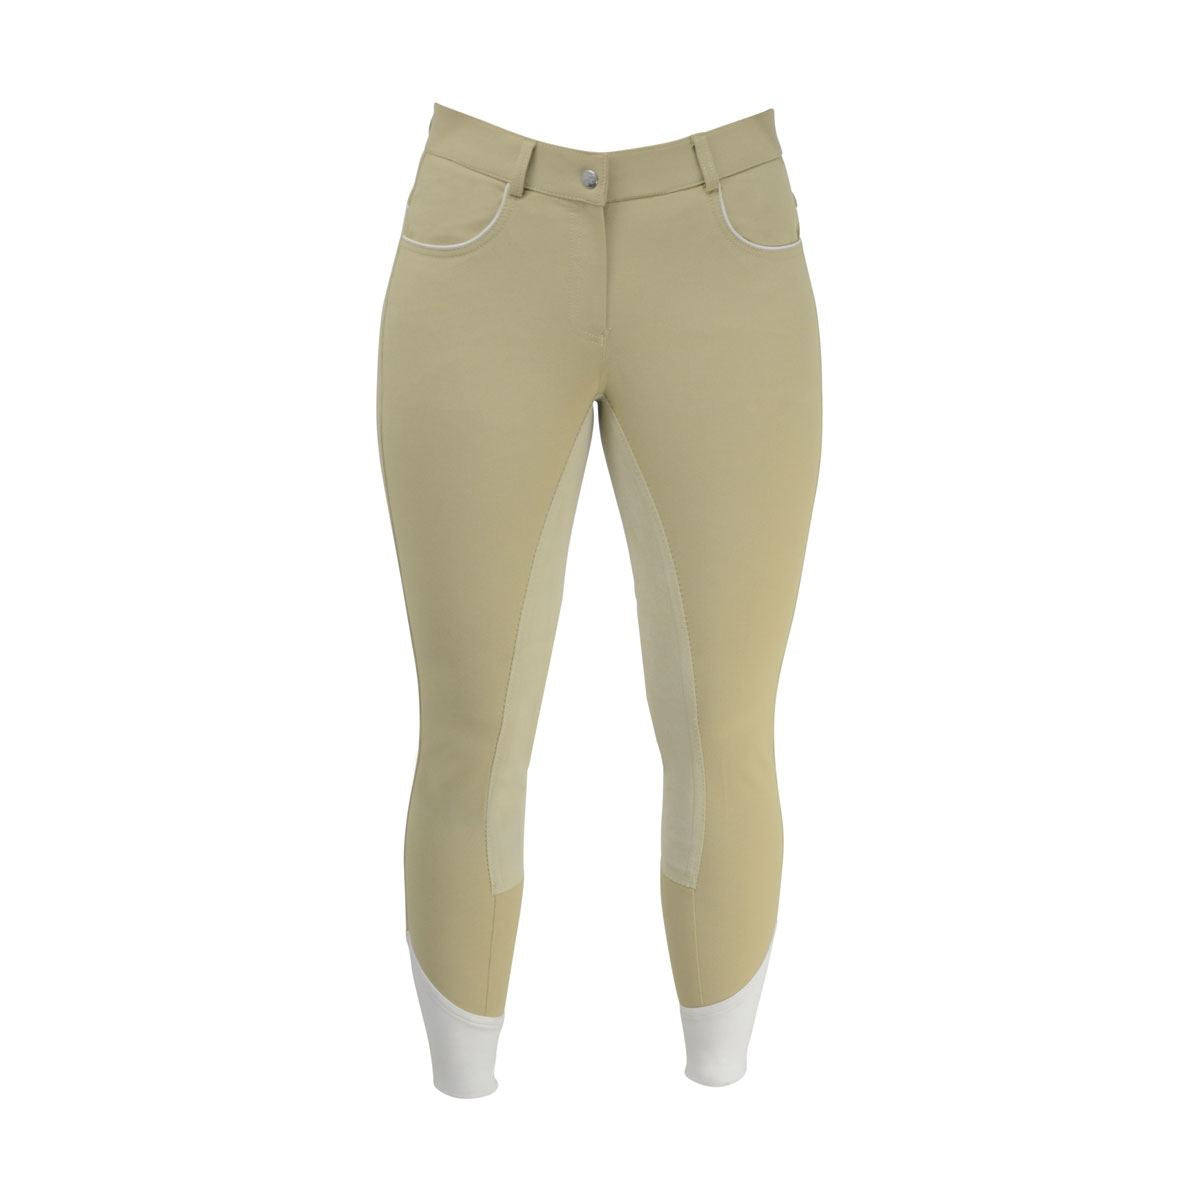 HyPERFORMANCE Oxburgh Breeches - Just Horse Riders